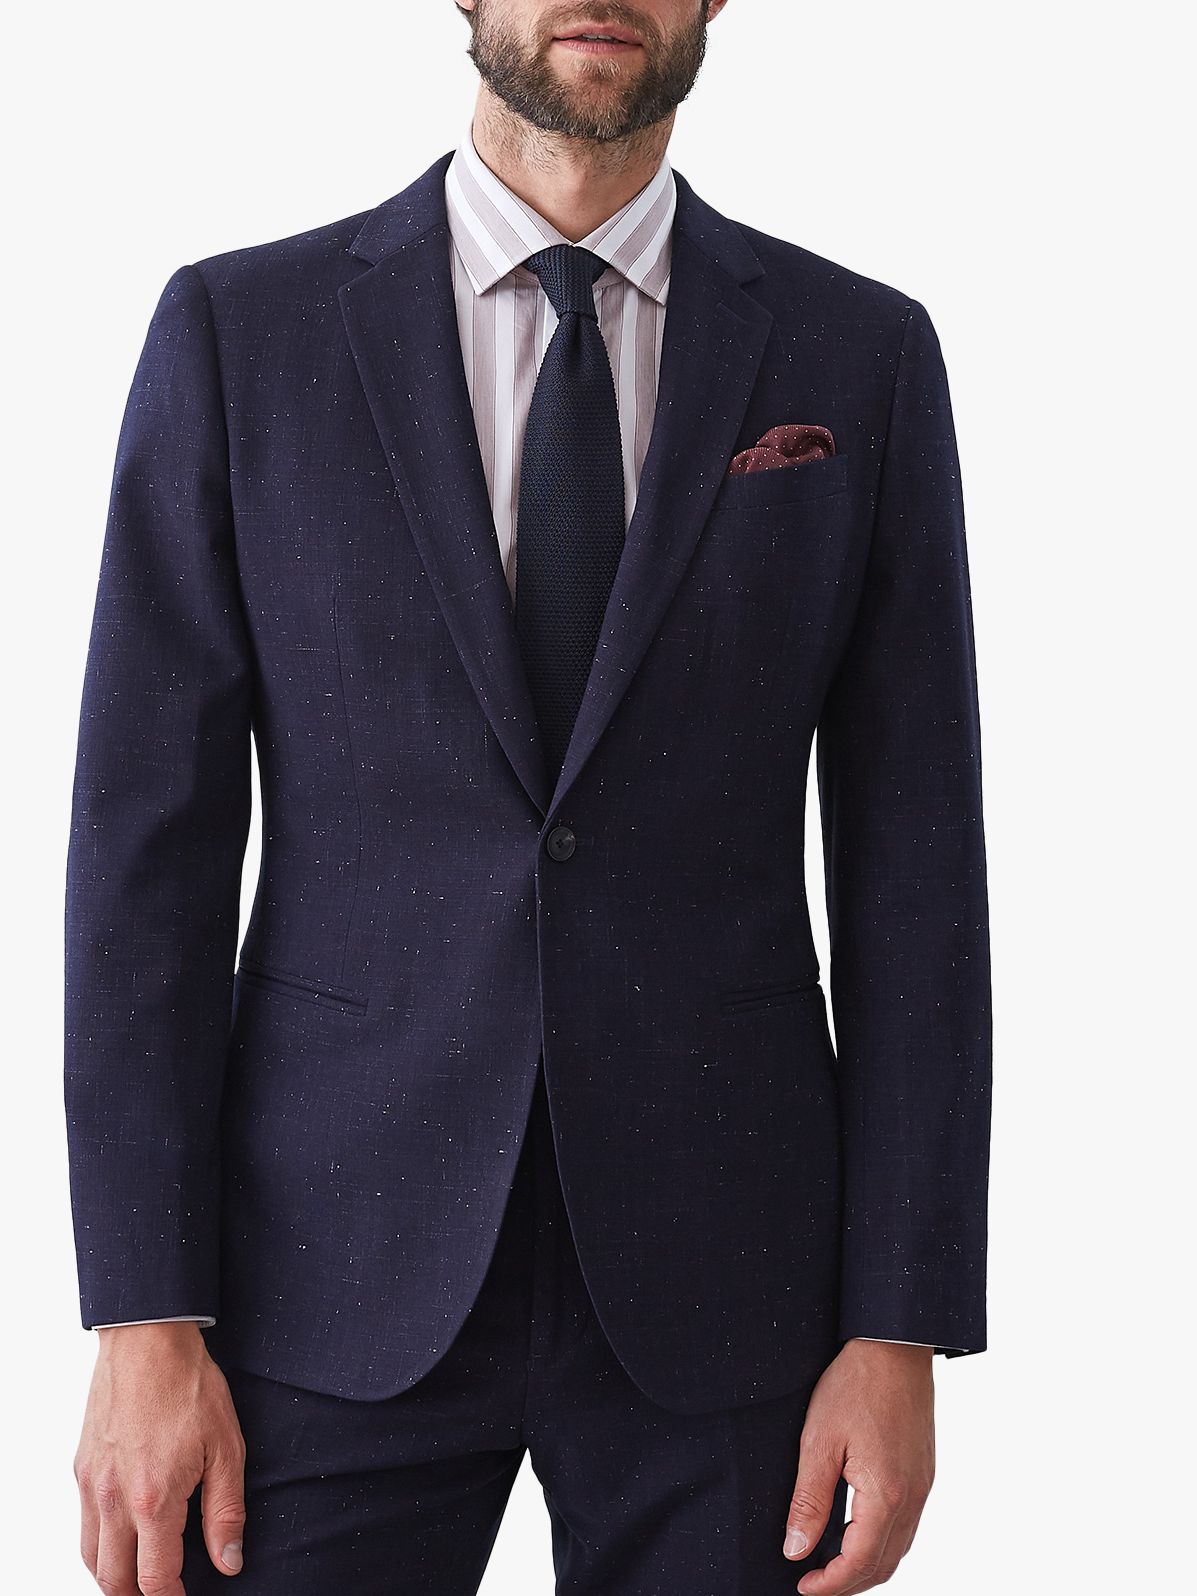 Reiss Fountain Nep Texture Slim Fit Suit Jacket, Navy at John Lewis ...